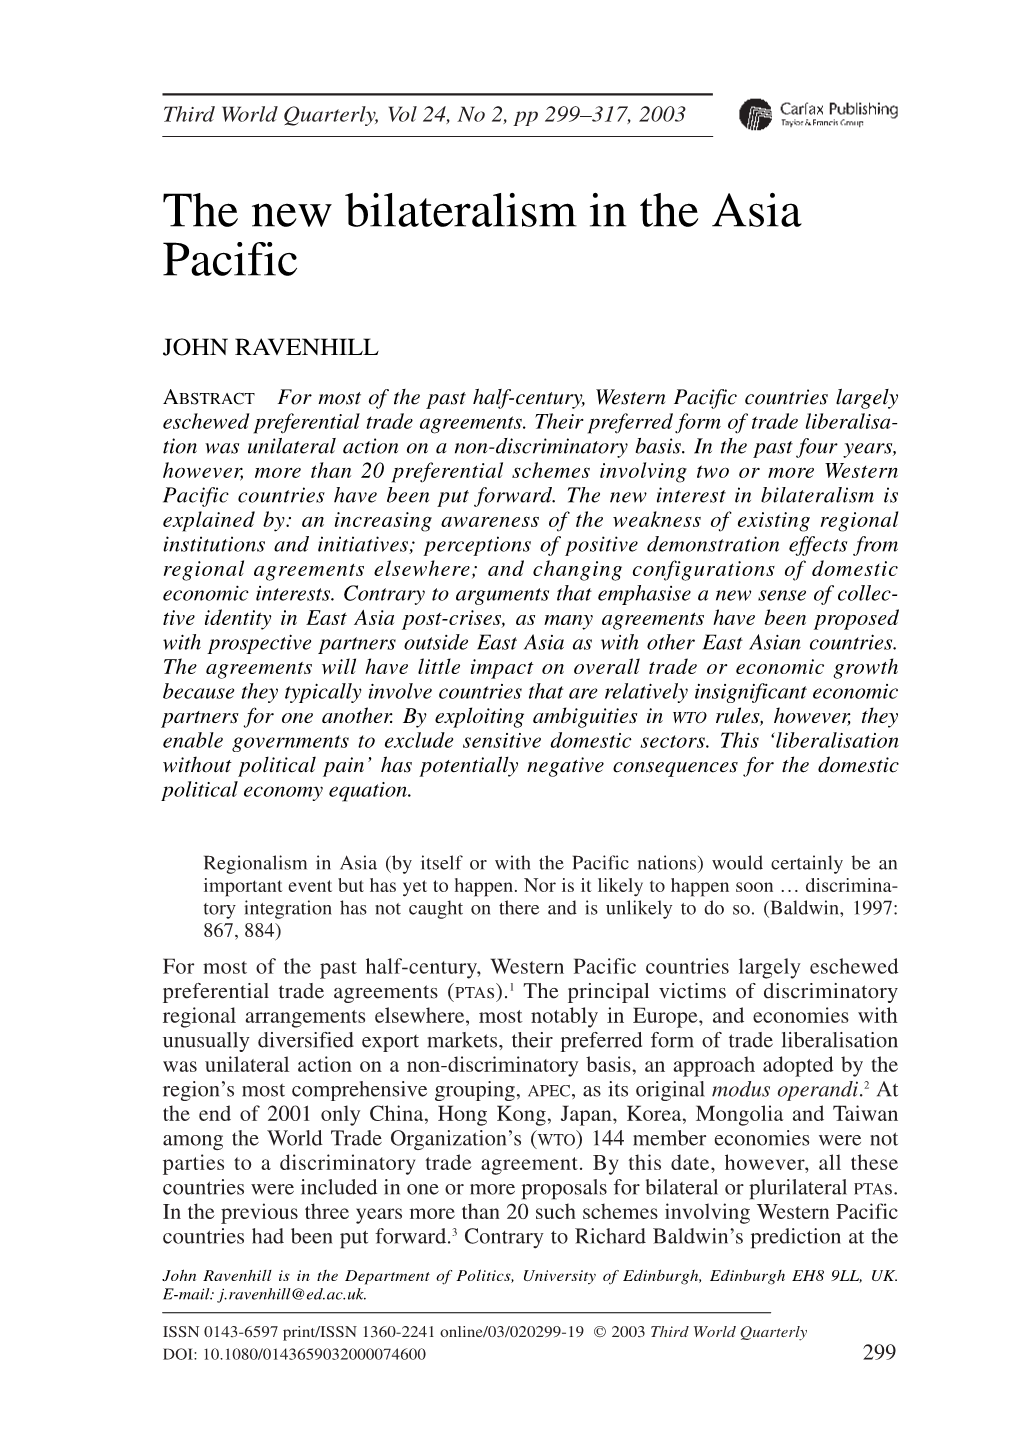 The New Bilateralism in the Asia Pacific